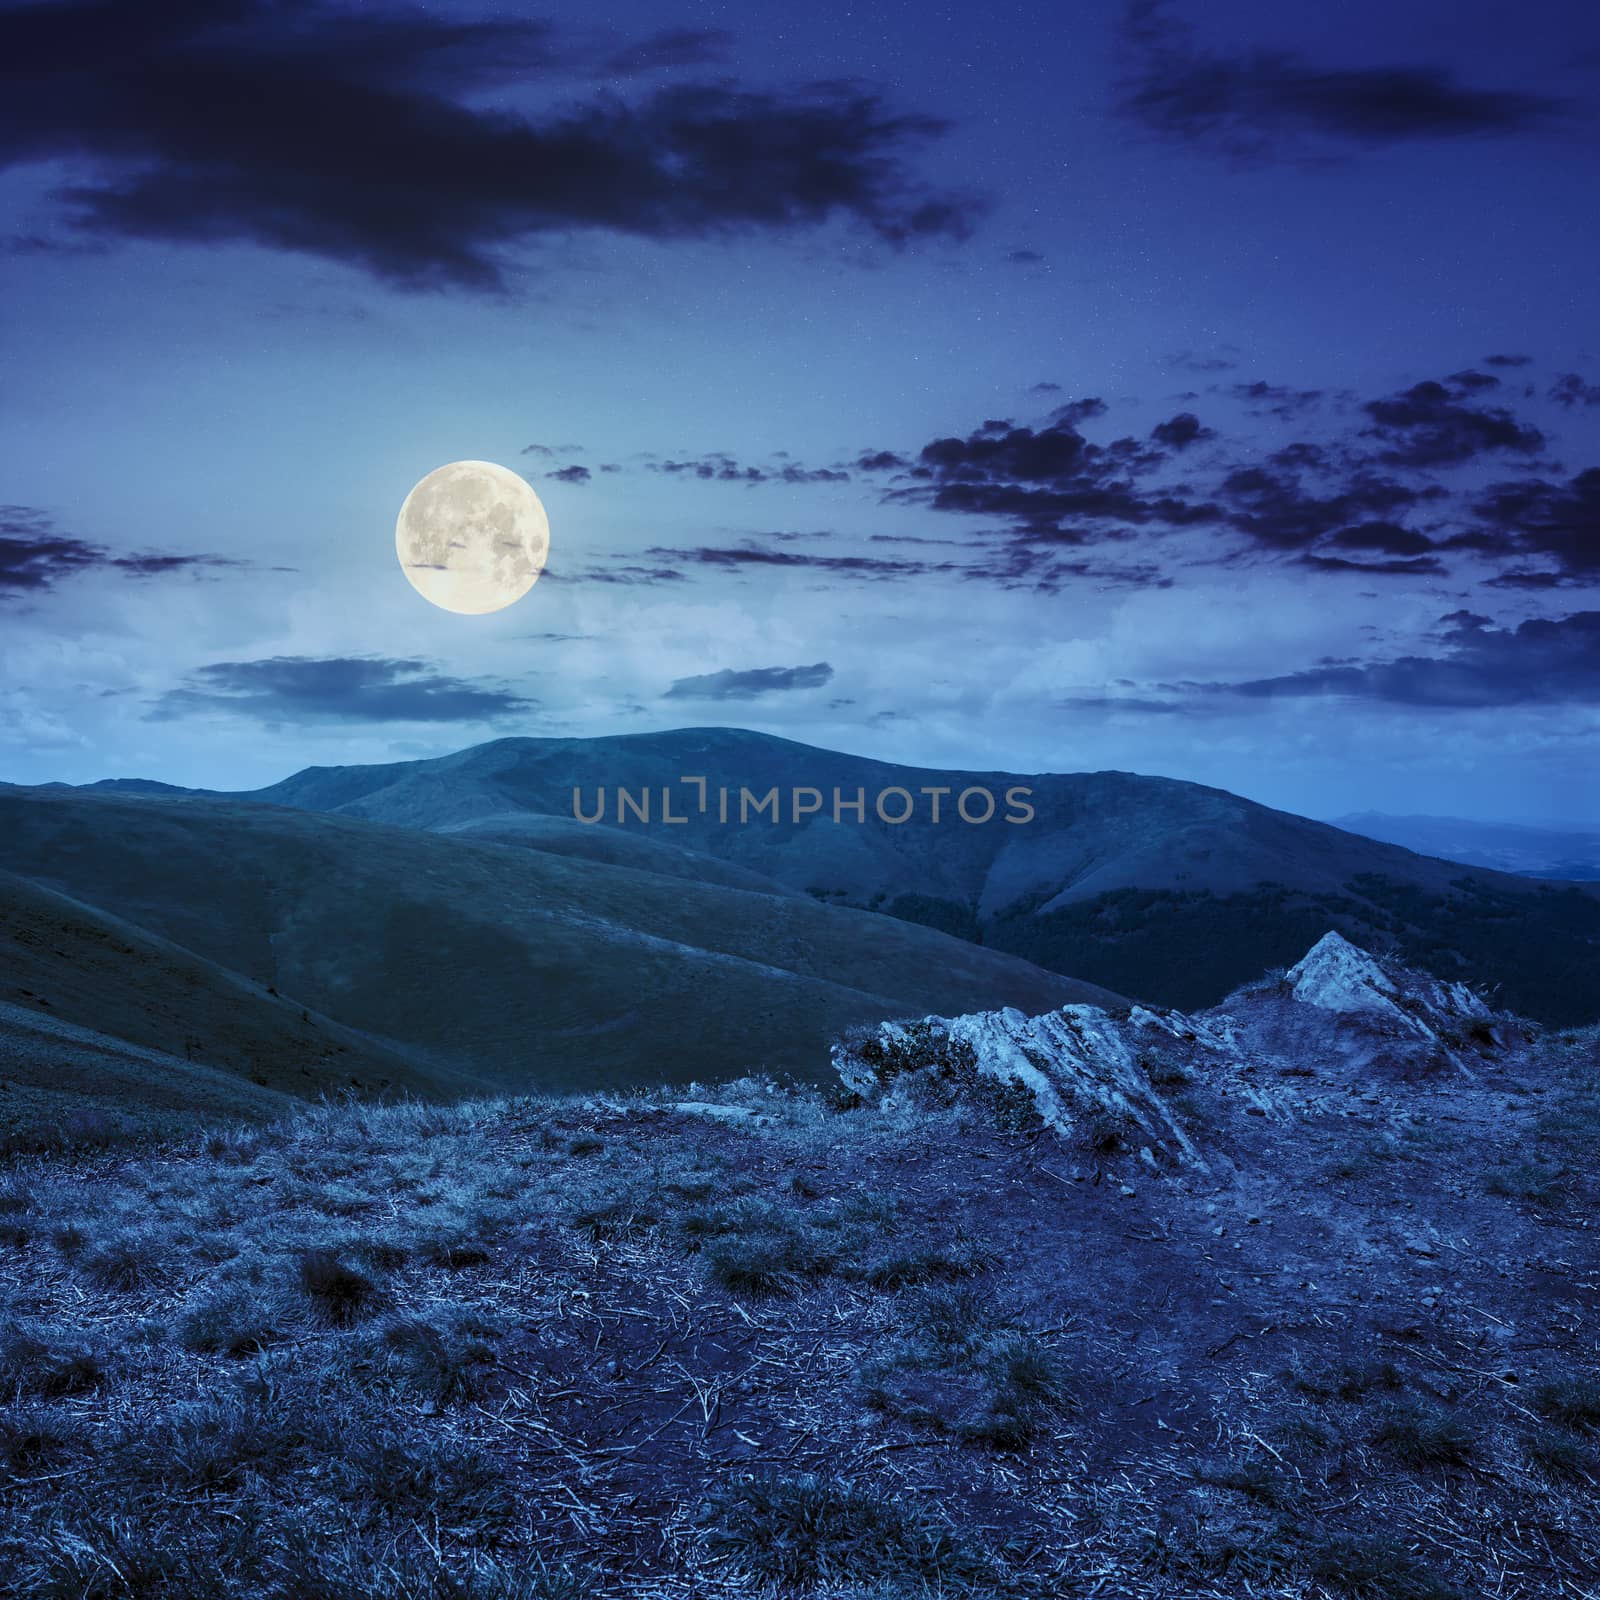 mountain landscape. valley with stones on the hillside. forest on the mountain under the beam of light falls on a clearing at the top of the hill. at night in full moon light